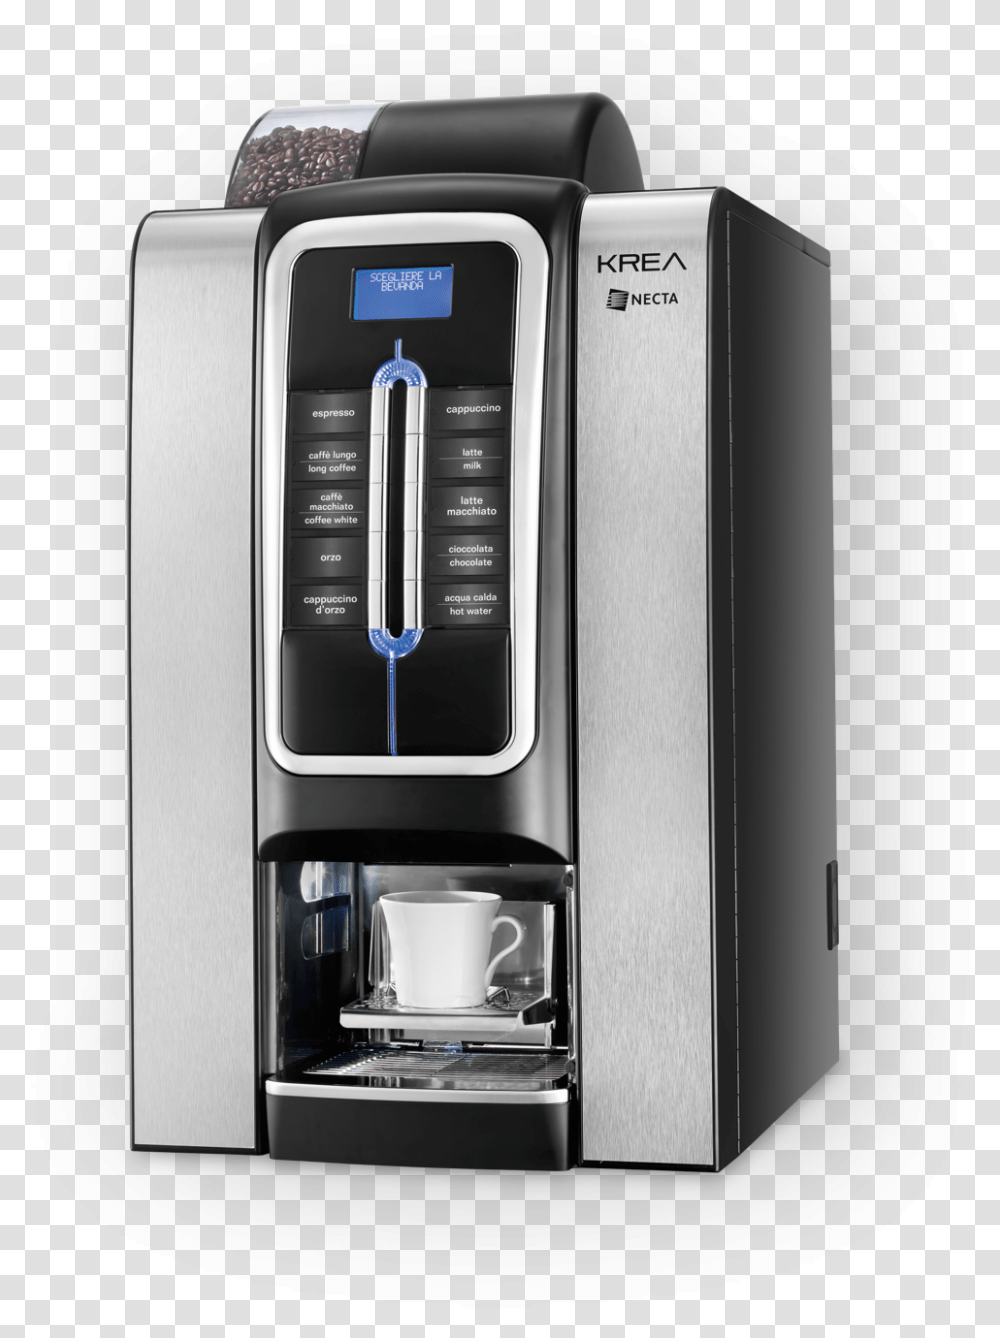 Santo Domingo Coffee Machine, Mobile Phone, Electronics, Cell Phone, Coffee Cup Transparent Png